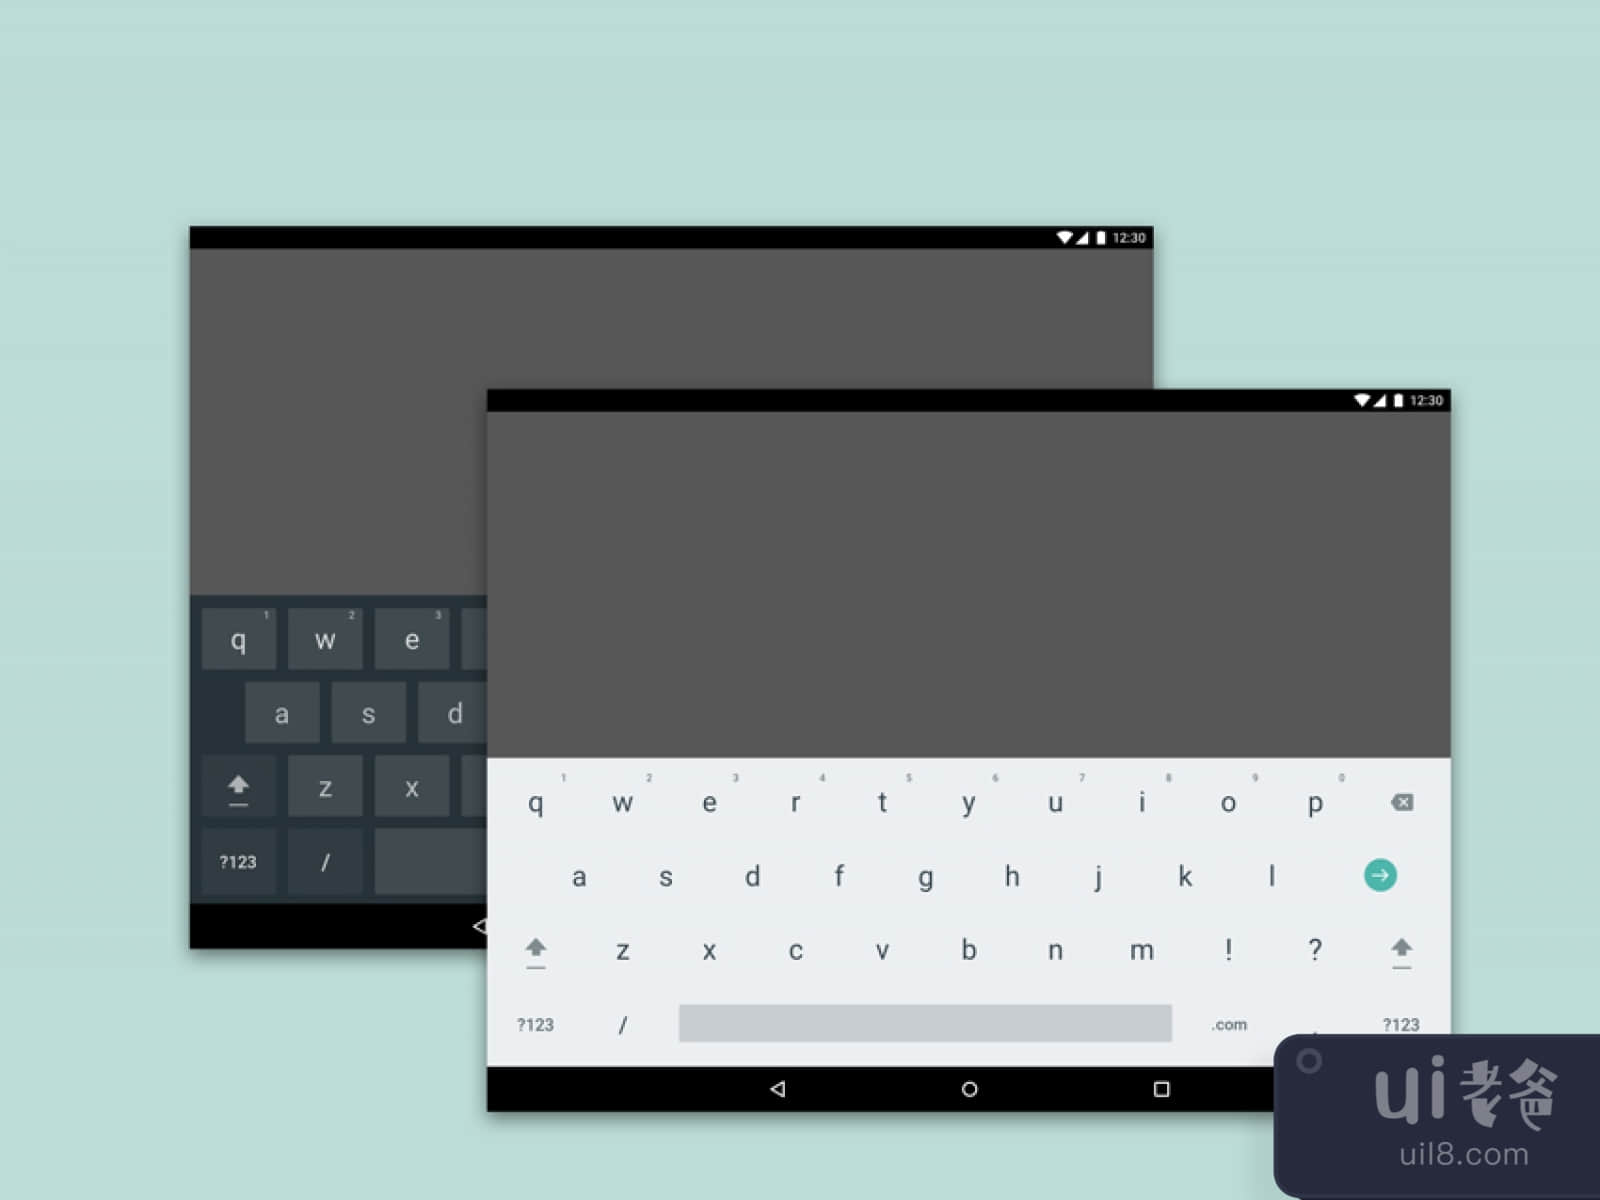 Android Tablet Keyboard for Figma and Adobe XD No 1